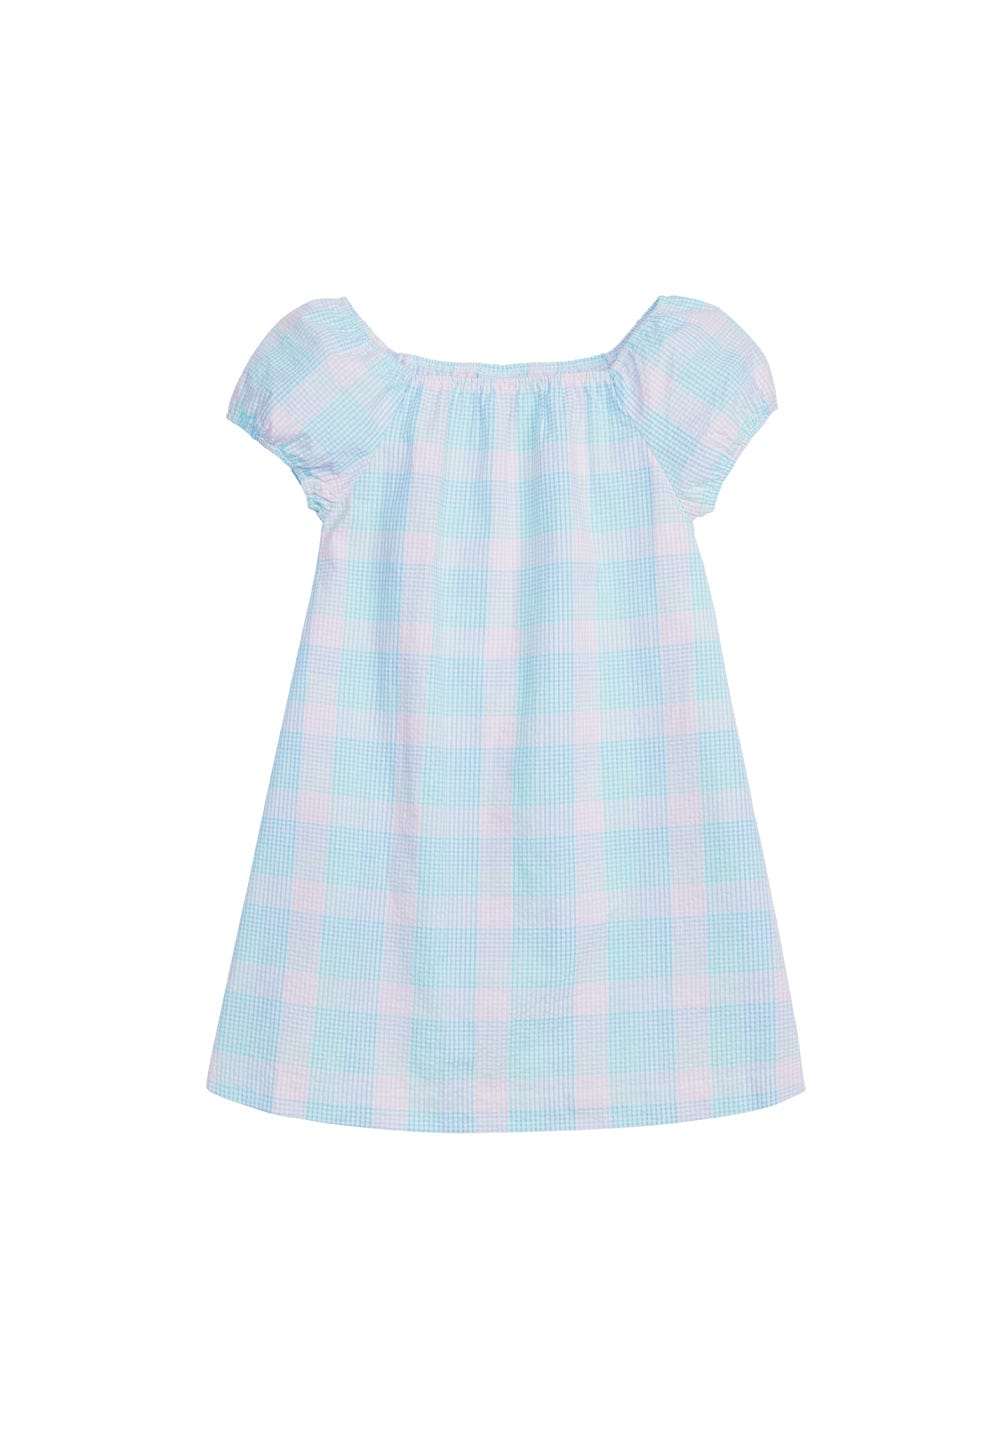 classic childrens clothing girls blue and pink plaid dress with short sleeves 